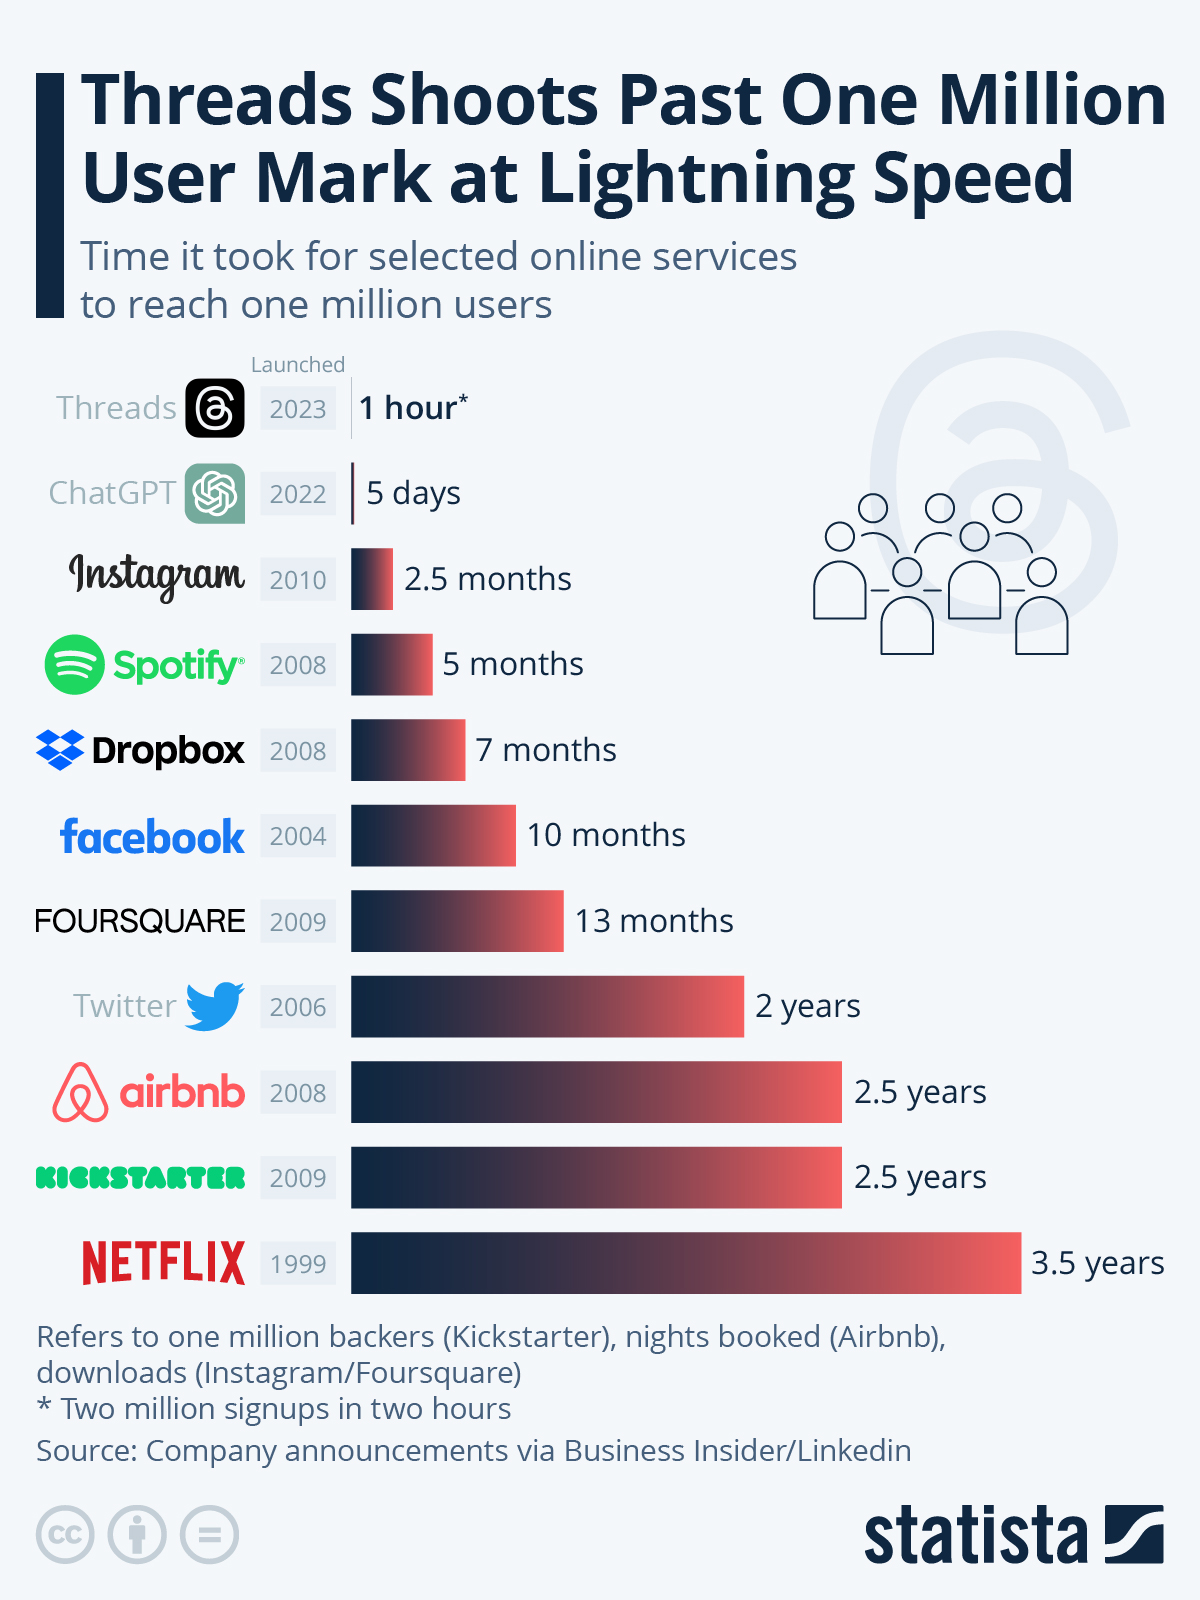 Adoption of Online Services